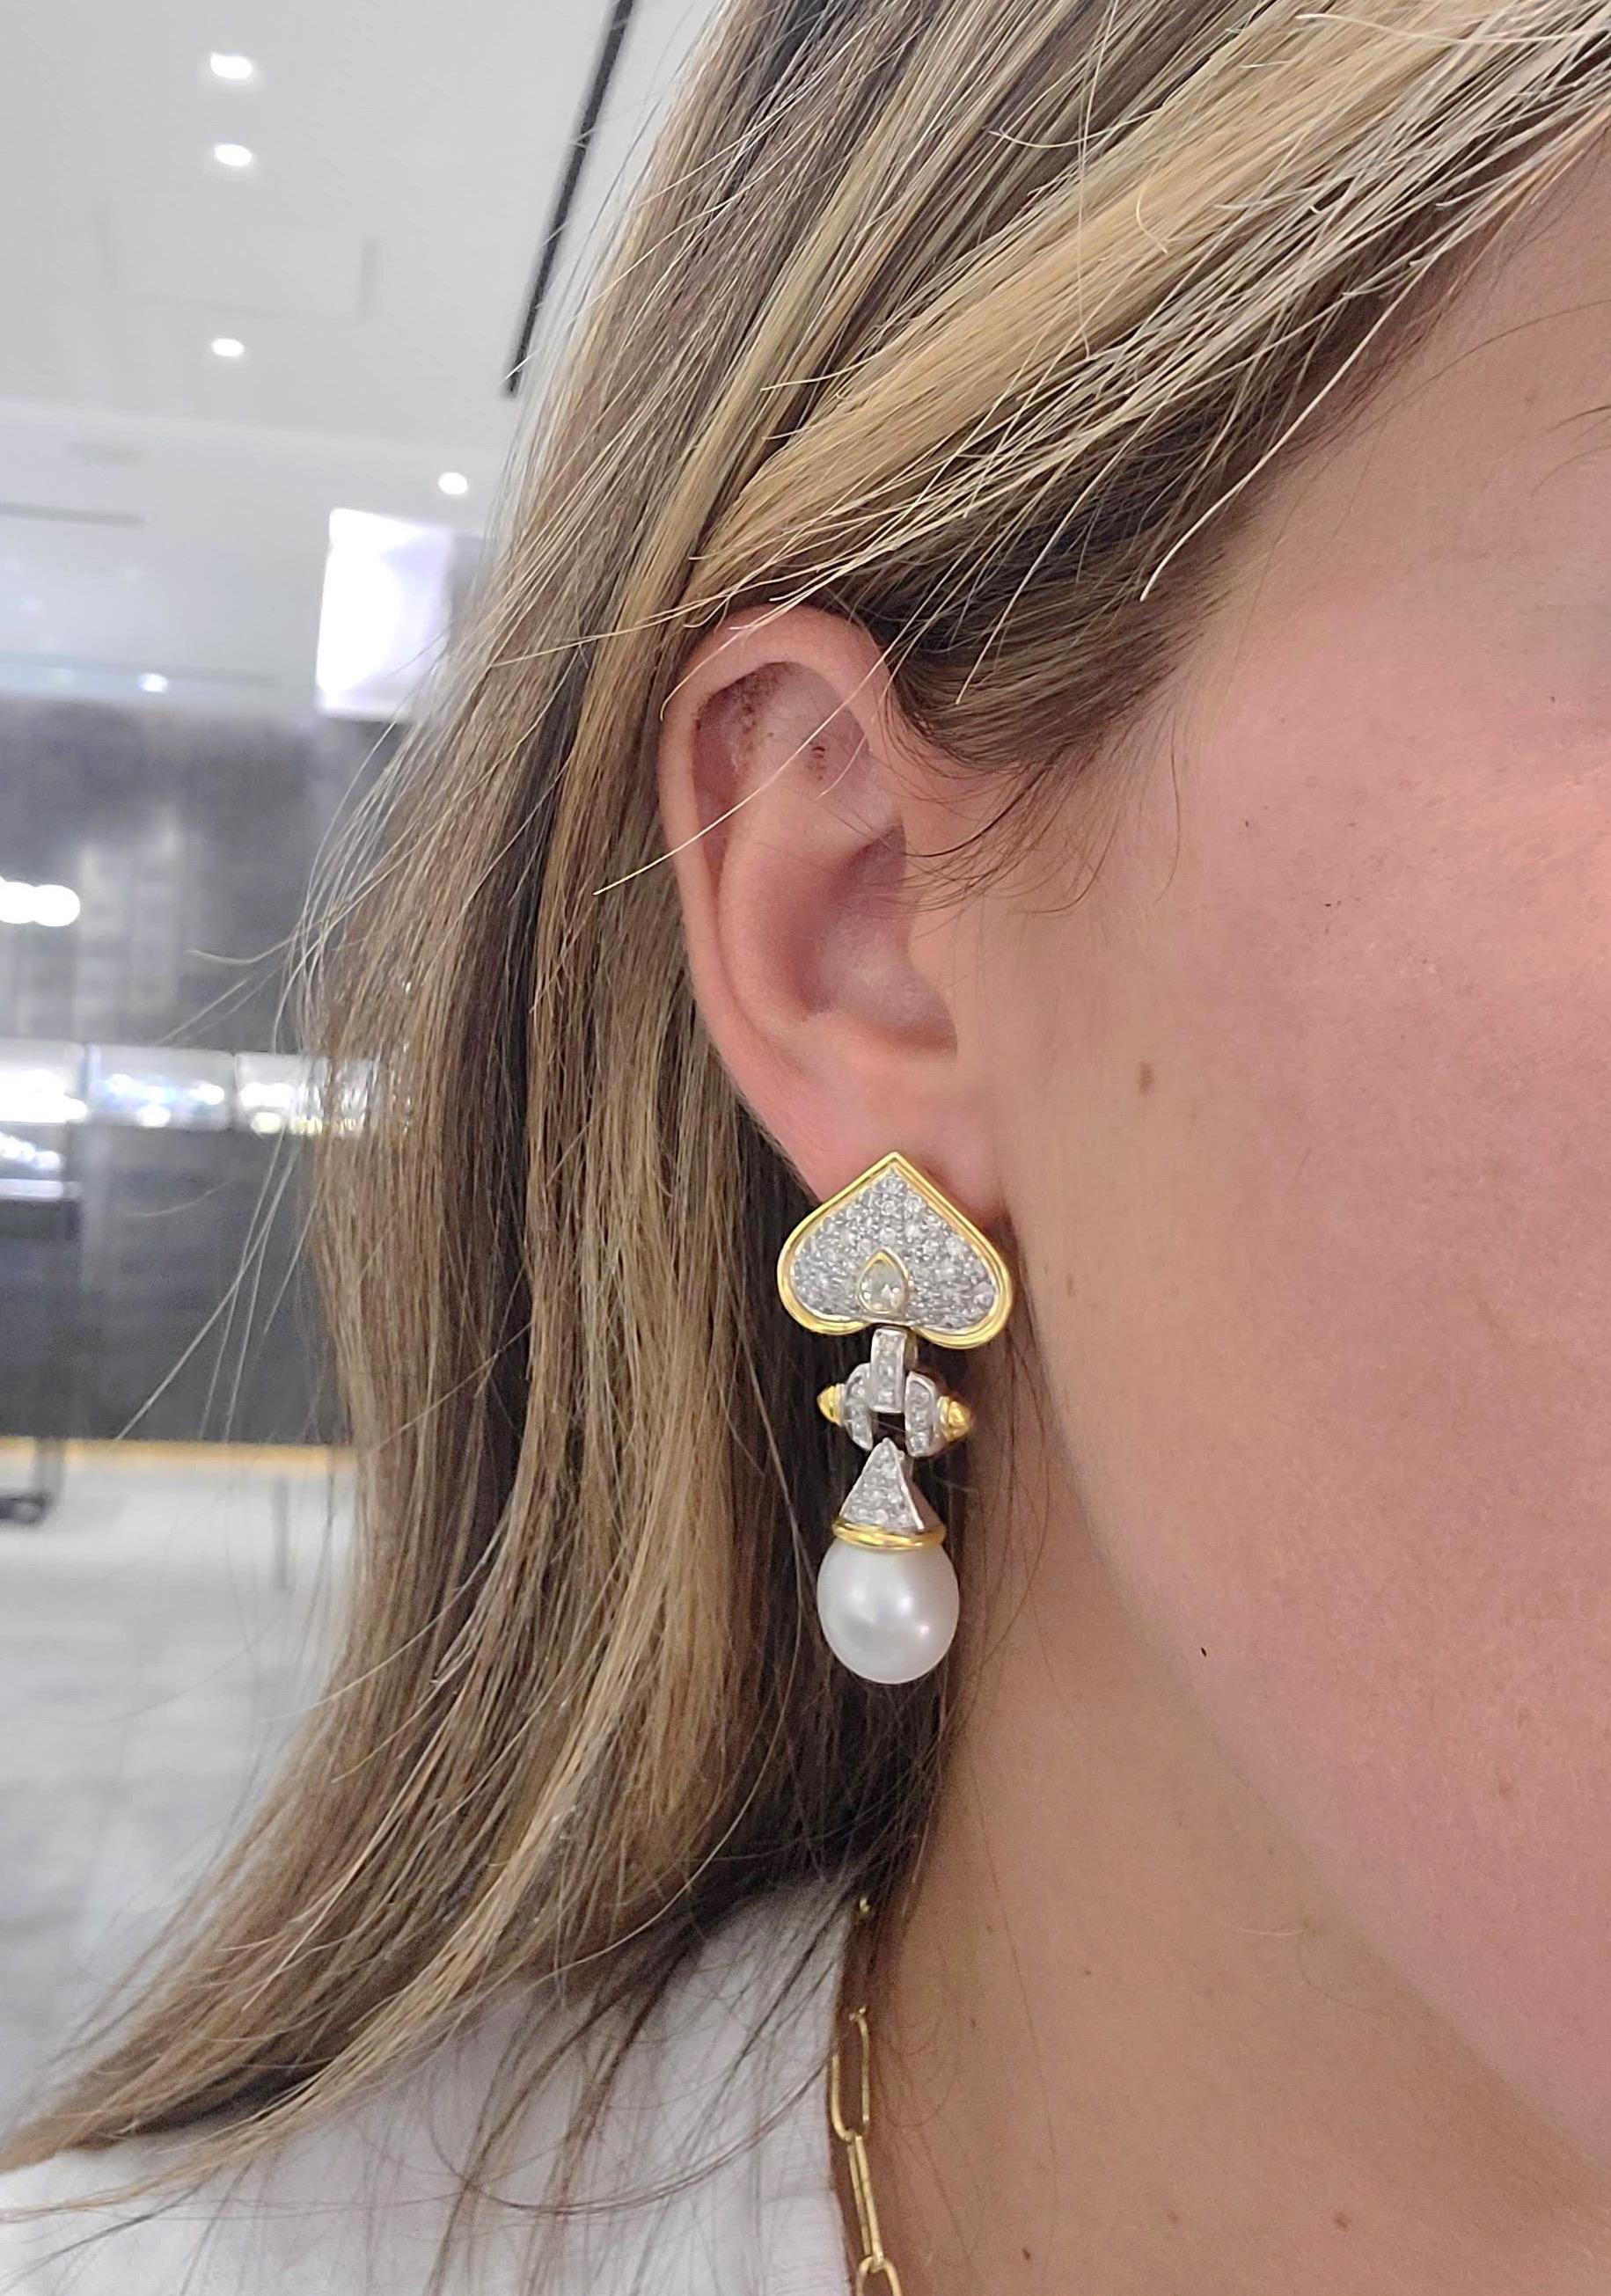 These earrings are designed with 18 karat yellow gold heart shapes that have been pave set with Diamonds. A single pear shaped bezel set Diamond is in the center of each heart. A detachable Diamond capped South Sea Pearl drop hangs from the gold and